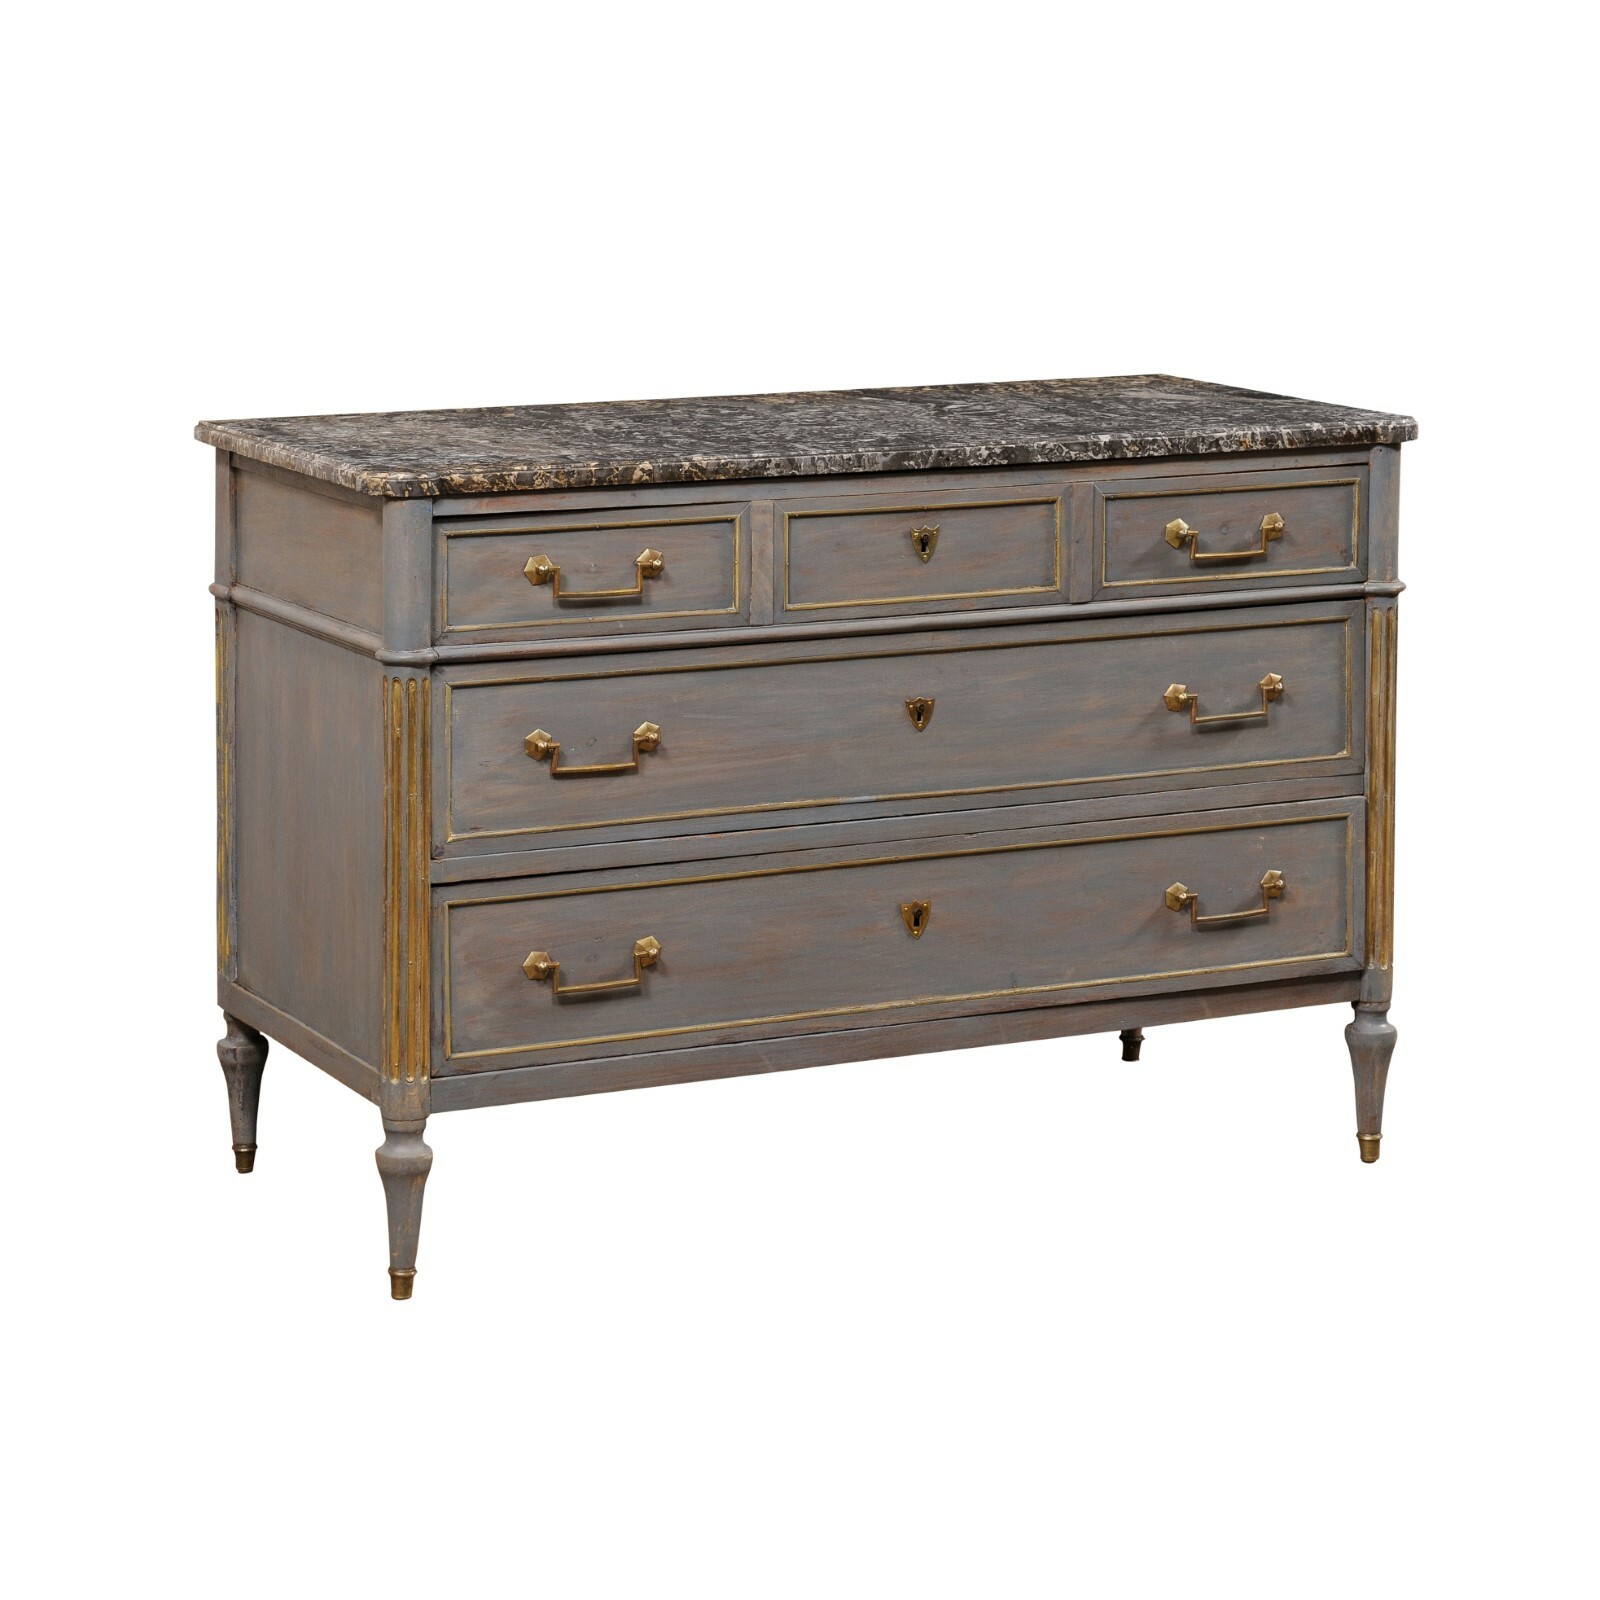 French Neoclassic Marble Top Chest, 19th C.